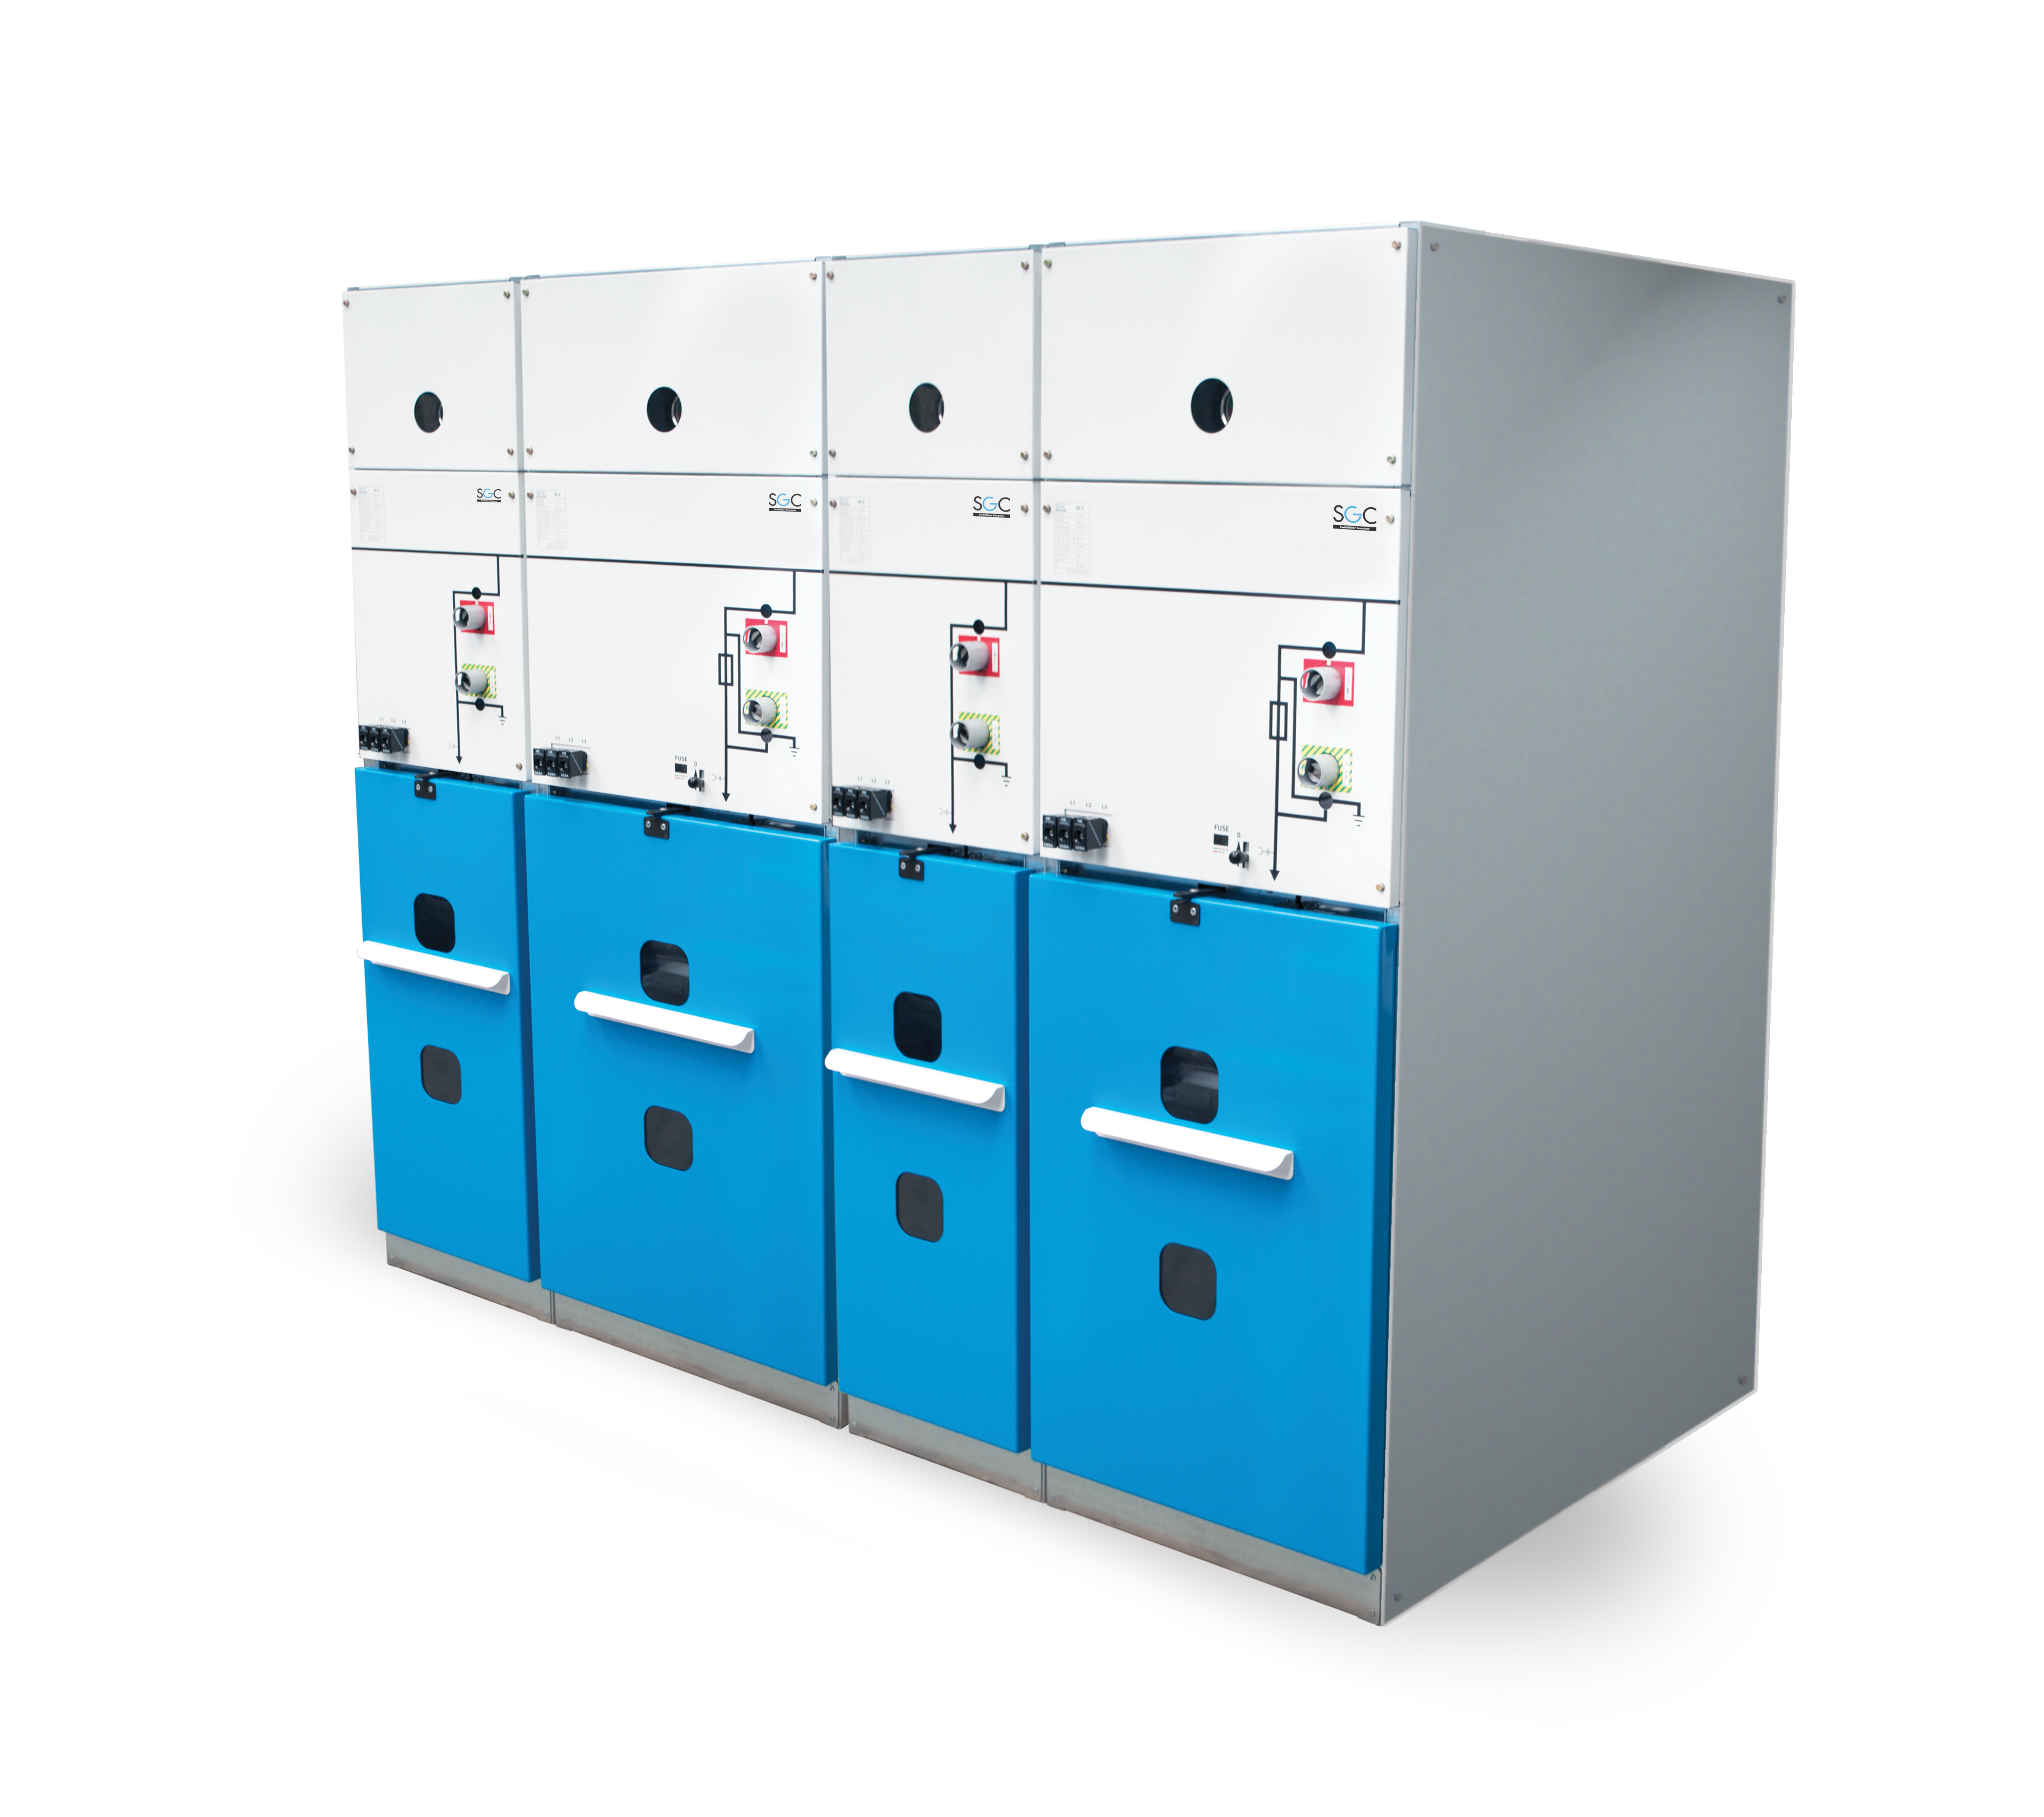 Gas insulated switchgear: DI-2 with 3-position load break switch